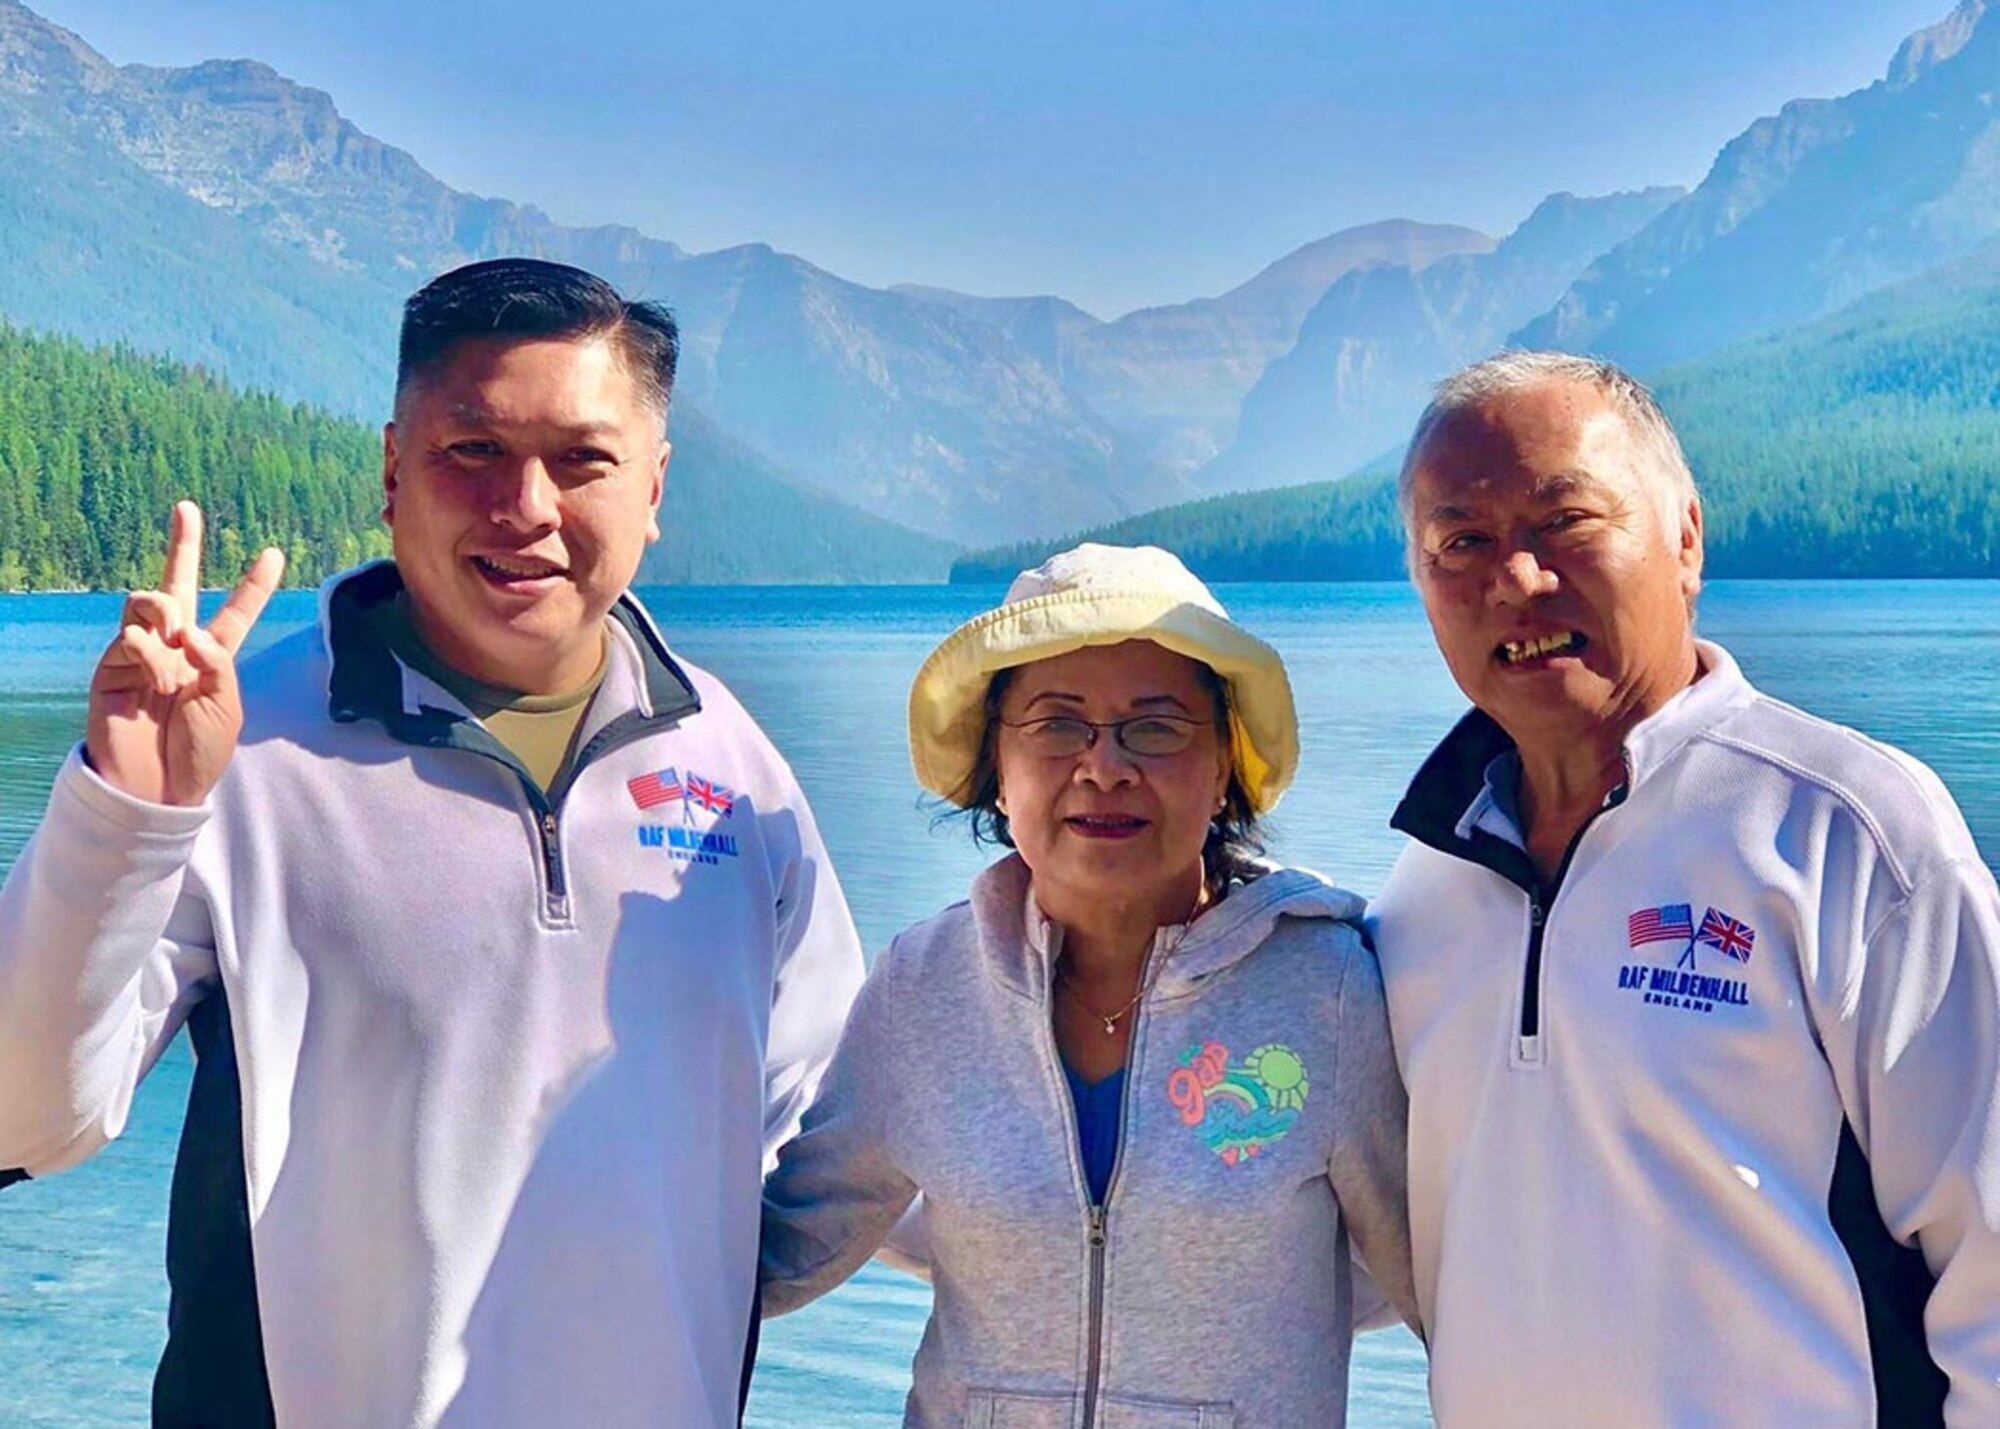 U.S. Air Force Col. Van Thai, left, 100th Operations Group commander, poses for a photo with his parents at Glacier National Park, Montana, August 2021.  Born in Saigon, Vietnam, Van shared his story and heritage for Asian American Pacific Islander Heritage Month at Royal Air Force Mildenhall, May 2022. He, his parents and brother immigrated to Canada in 1981, then moved to Oklahoma, USA, in 1983. Thanks to his parents’ hard work and belief in good education, Thai earned himself a scholarship and attended the Air Force Academy. He’s now a KC-135 Stratotanker pilot and colonel in the U.S. Air Force. (Courtesy photo)